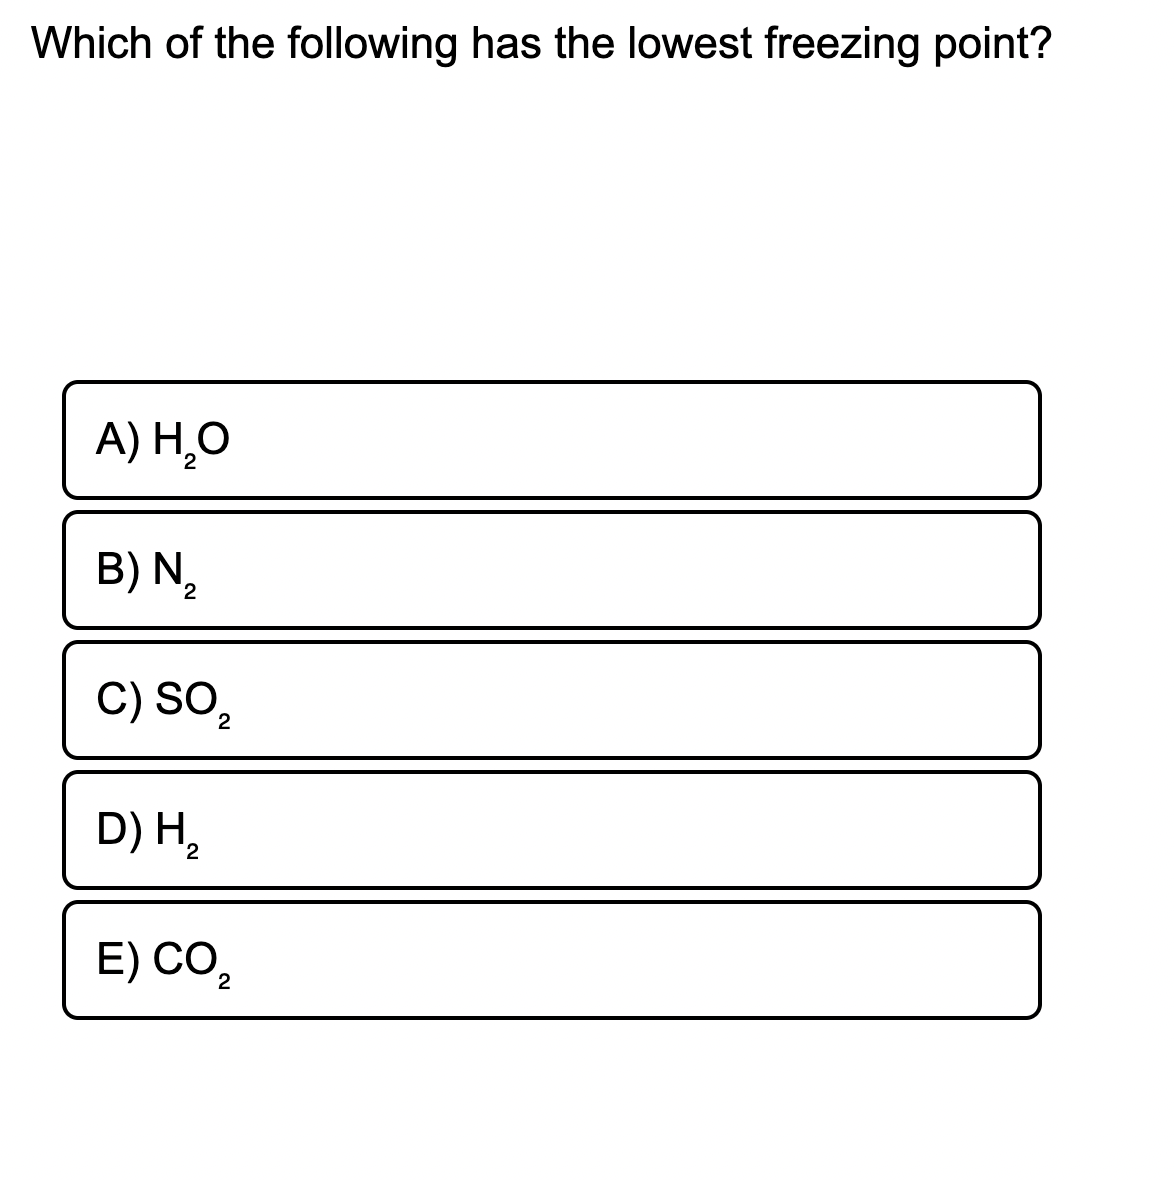 Which of the following has the lowest freezing point?
A) Н.О
B) N,
C) SO2
D) H,
E) CO,
